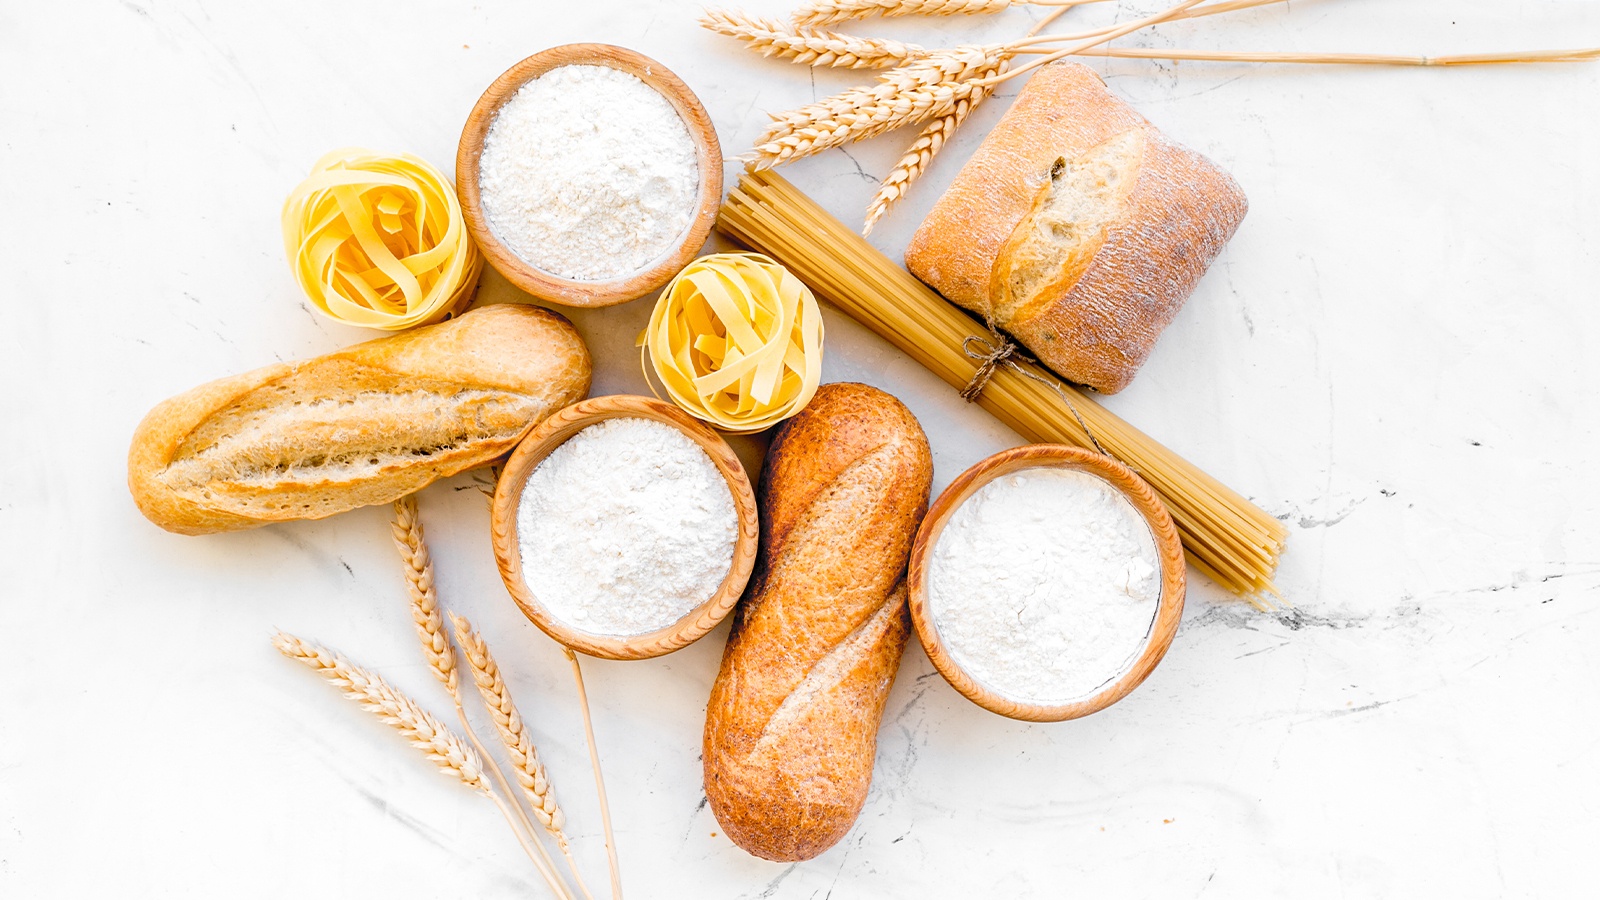 11 Reasons To Get off the Gluten